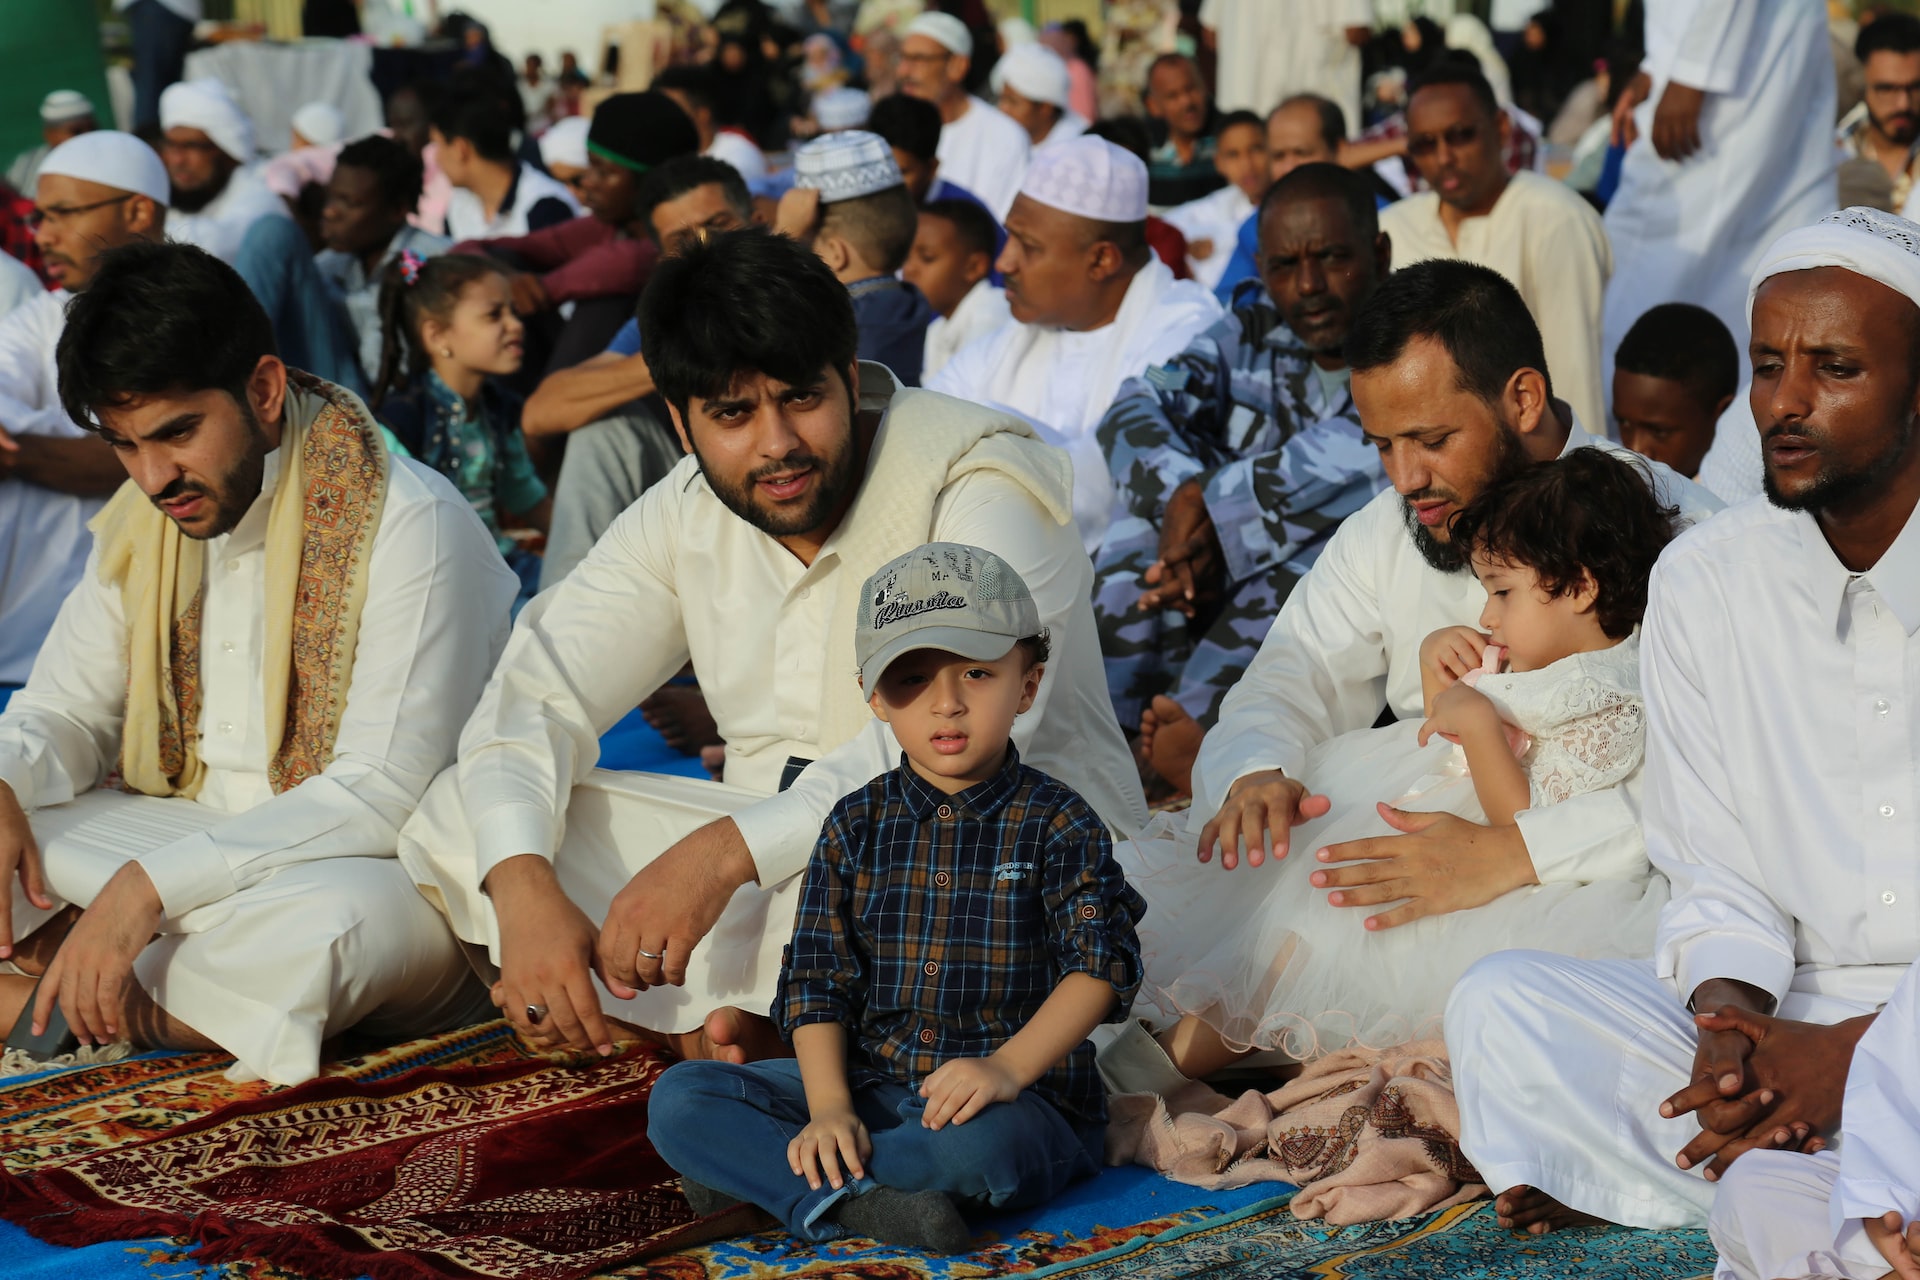 Young children celebrating ramadan with their fathers